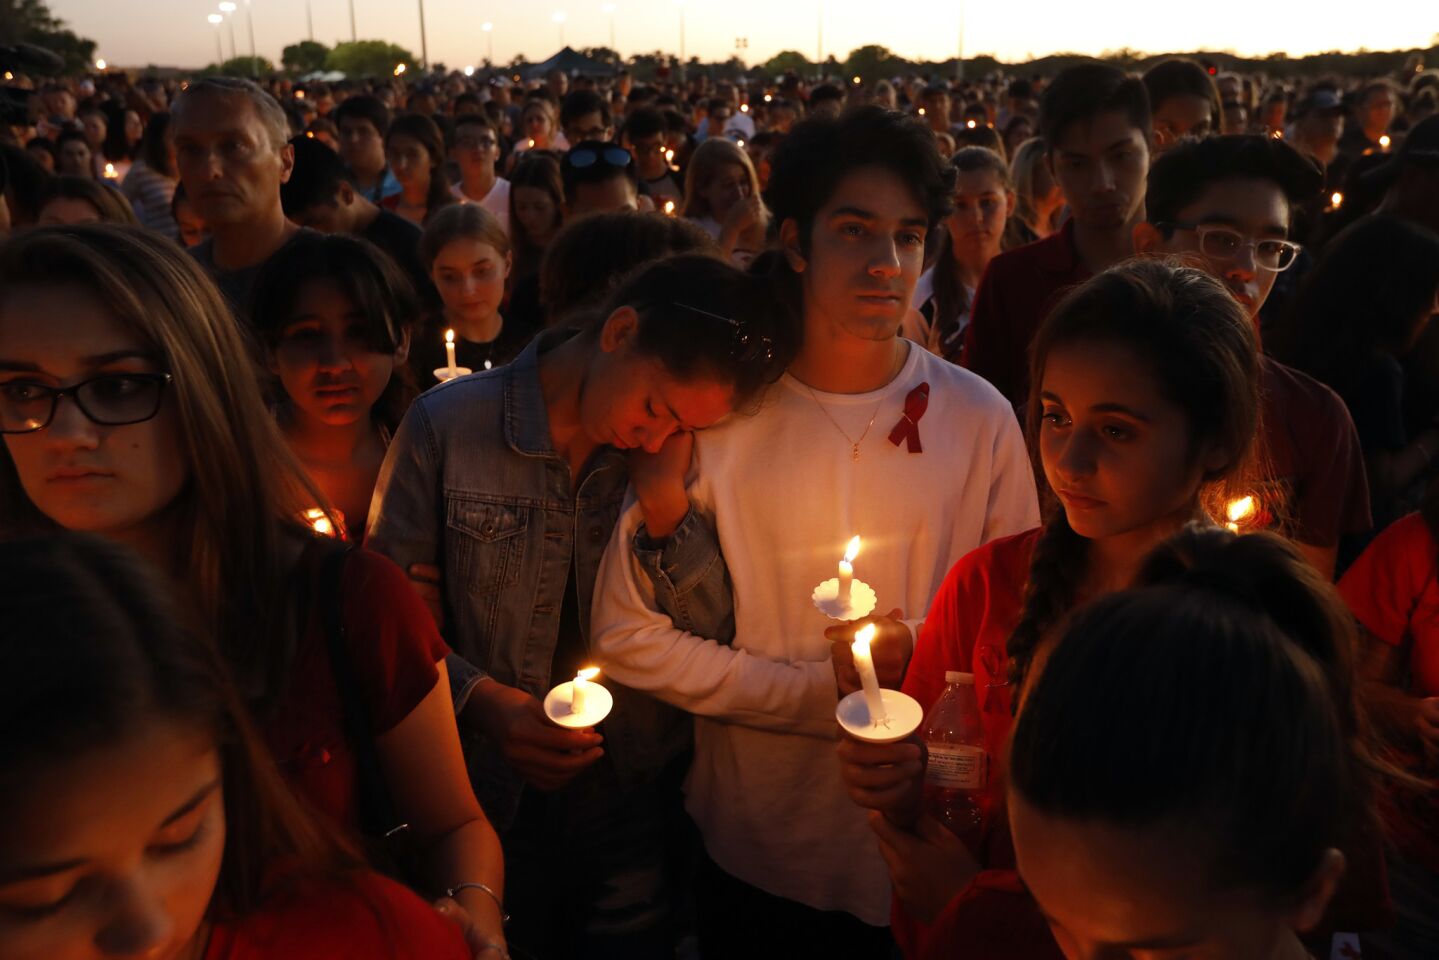 Thousands gather for an evening vigil at Pine Trails Park in Parkland, Fla. to remember those killed and injured in the shooting at Marjory Stoneman Douglas High School.